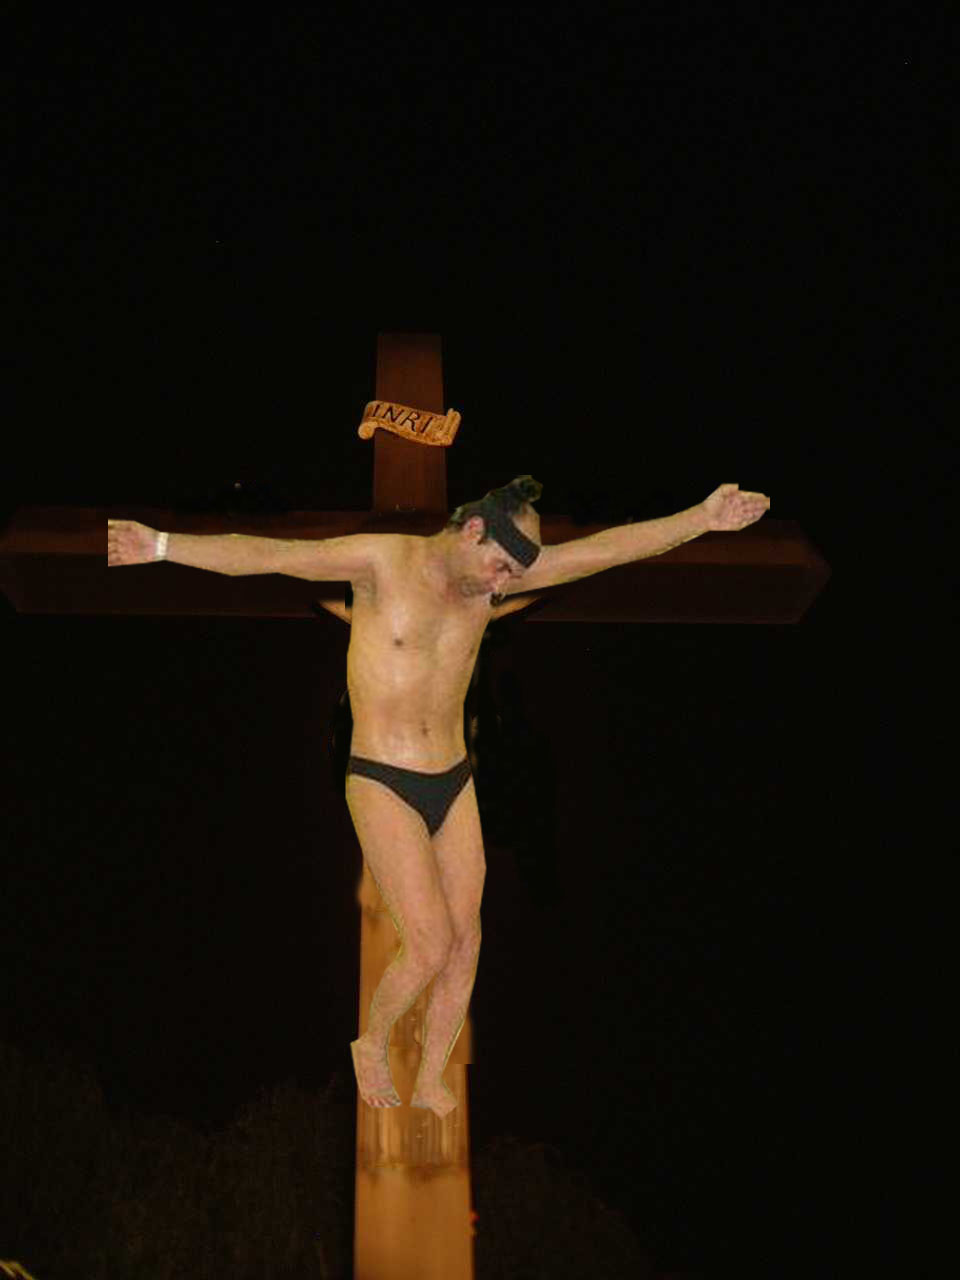 he died for our back problems